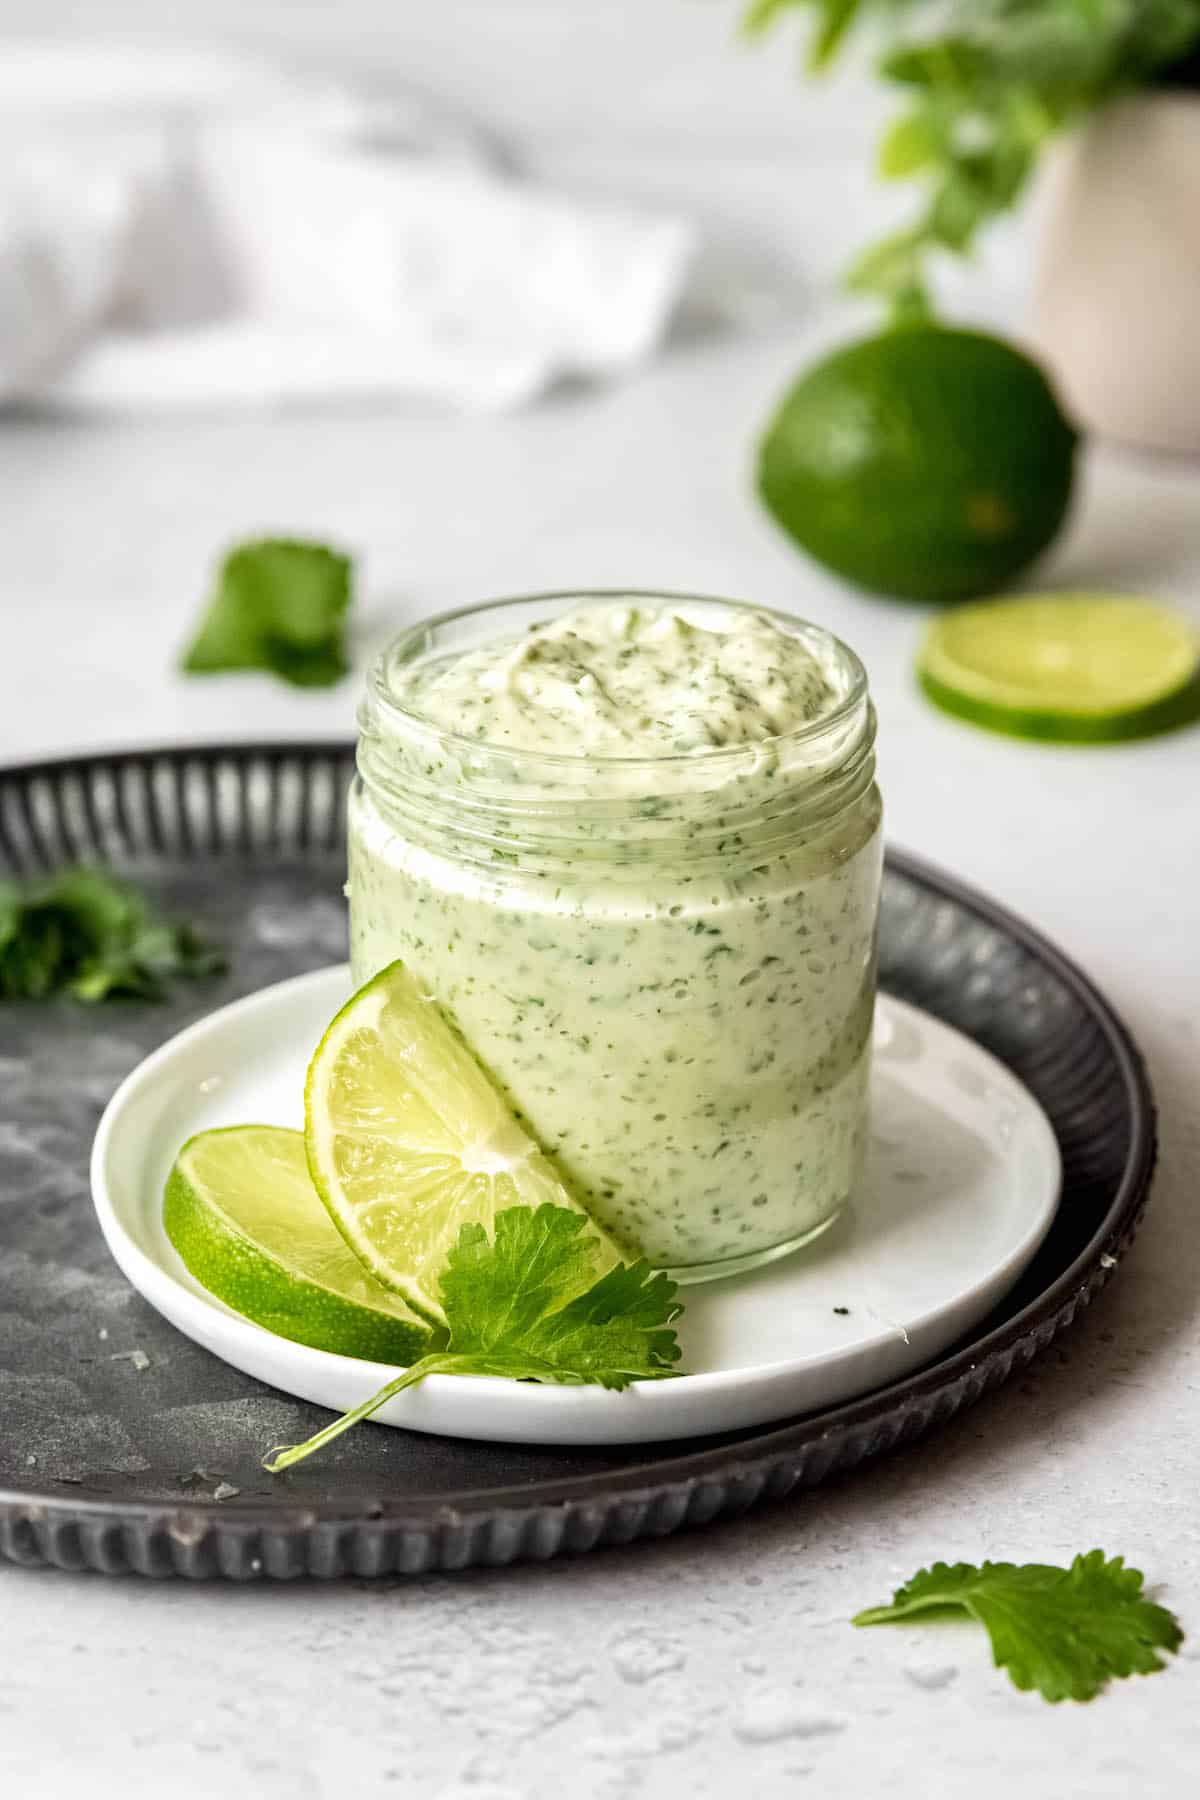 spicy, garlicky cilantro lime sauce in a jar on a table with fresh limes and cilantro.